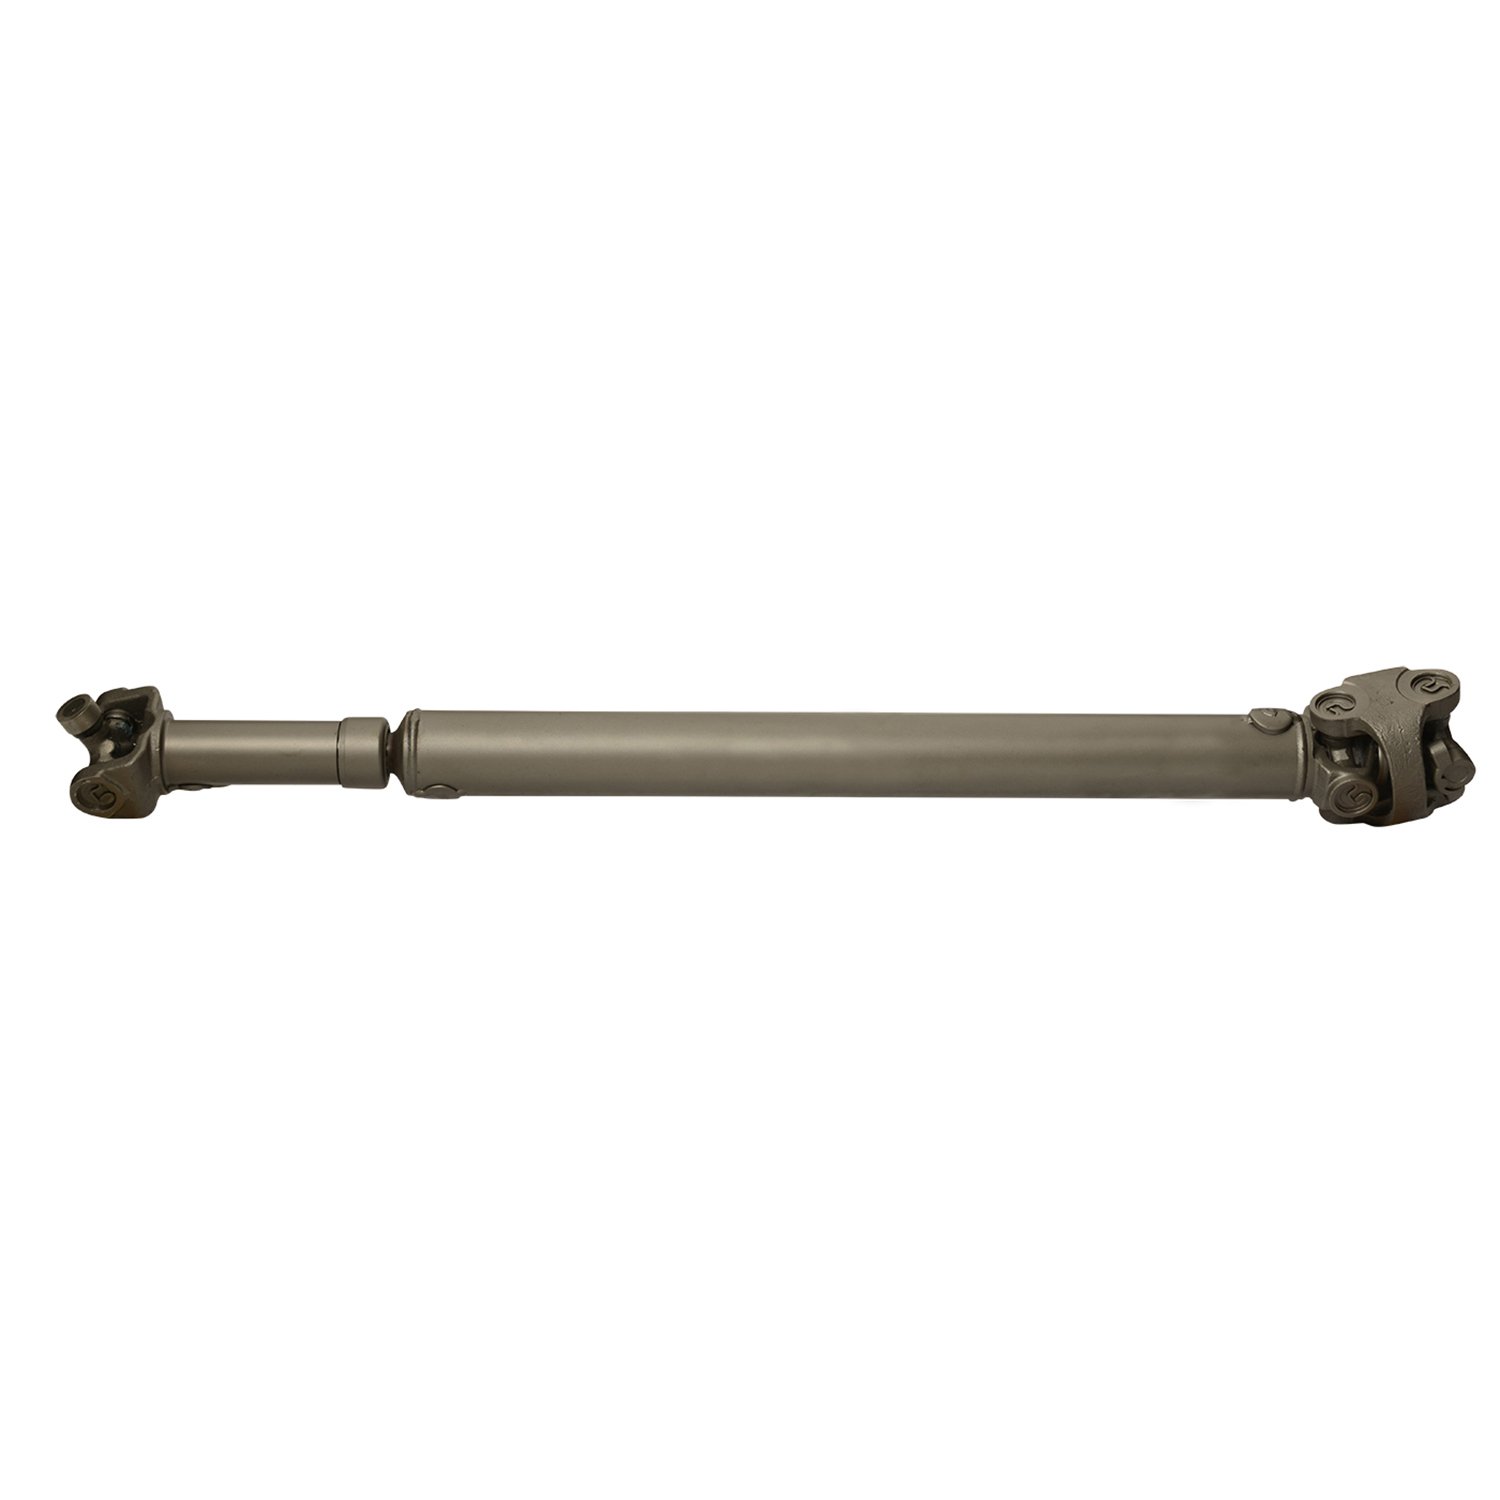 USA Standard ZDS9193 Front Driveshaft, For Bronco & F150, 33-1/2 in. Center-To-Center